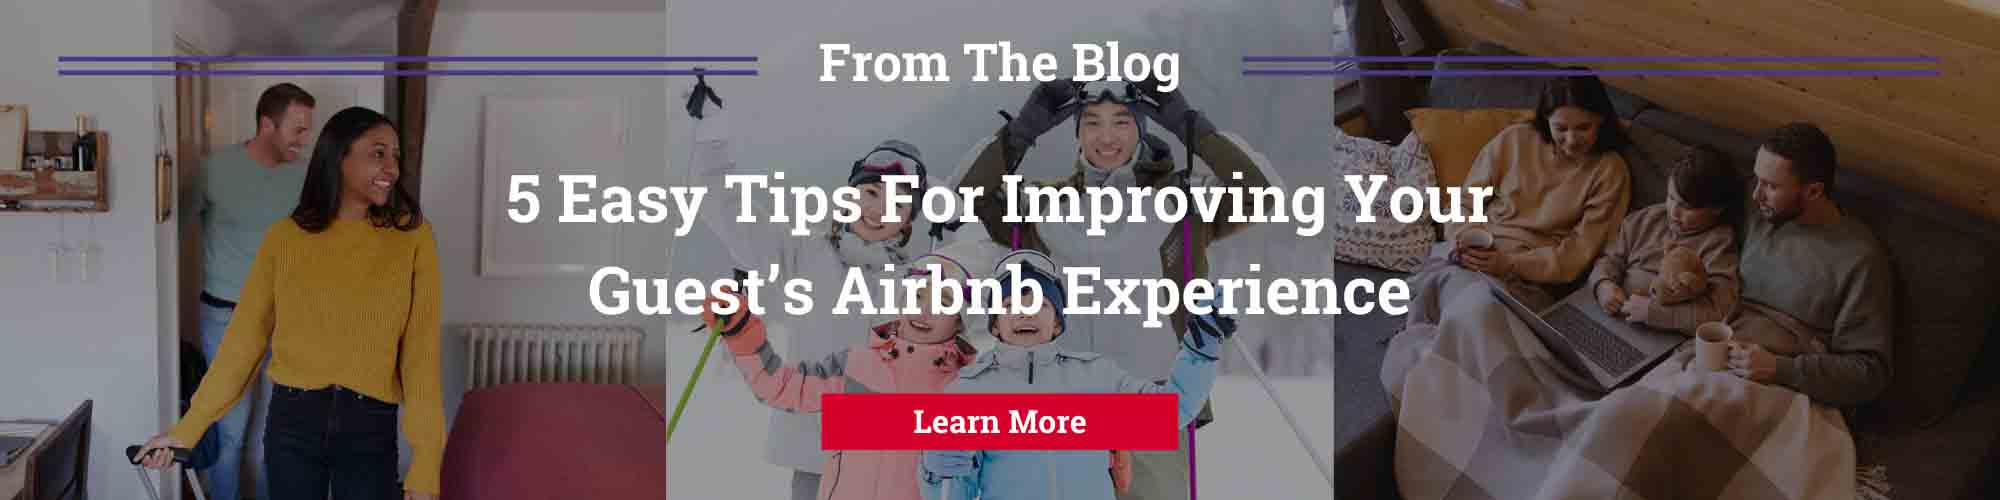 Tops To Improve Guests Air BnB Experience